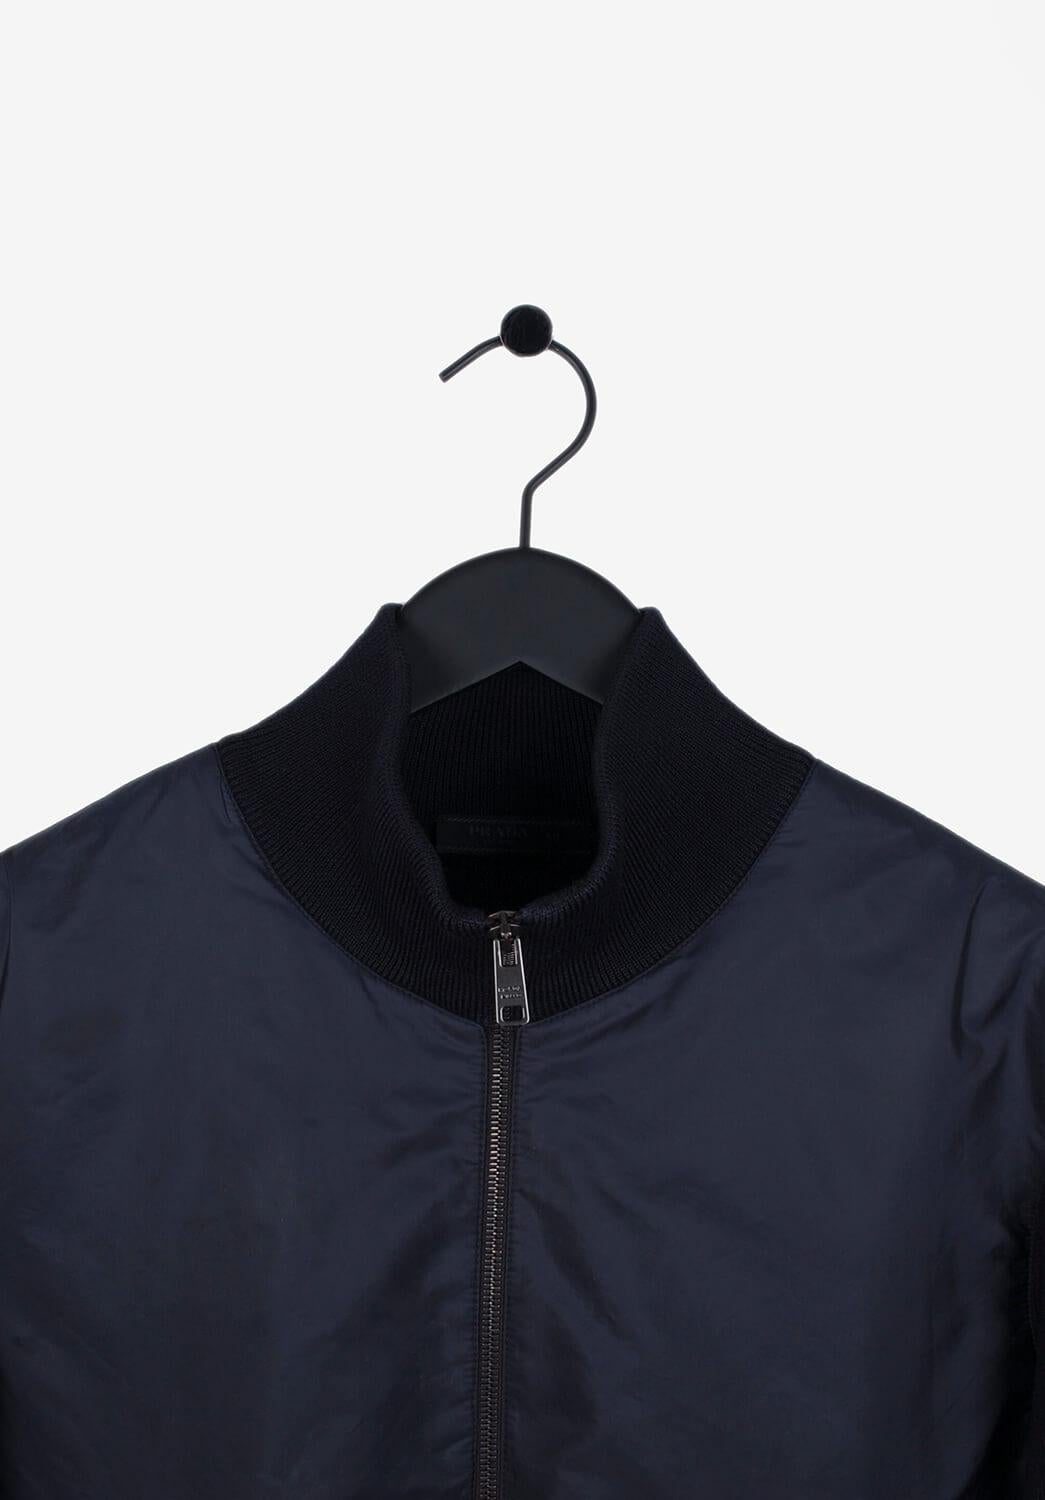 Item for sale is 100% genuine Prada Wool Men Jacket/Top
Color: Navy
(An actual color may a bit vary due to individual computer screen interpretation)
Material: 100% wool
Tag size: 50IT(M)
This jacket is great quality item. Rate 9 of 10, excellent